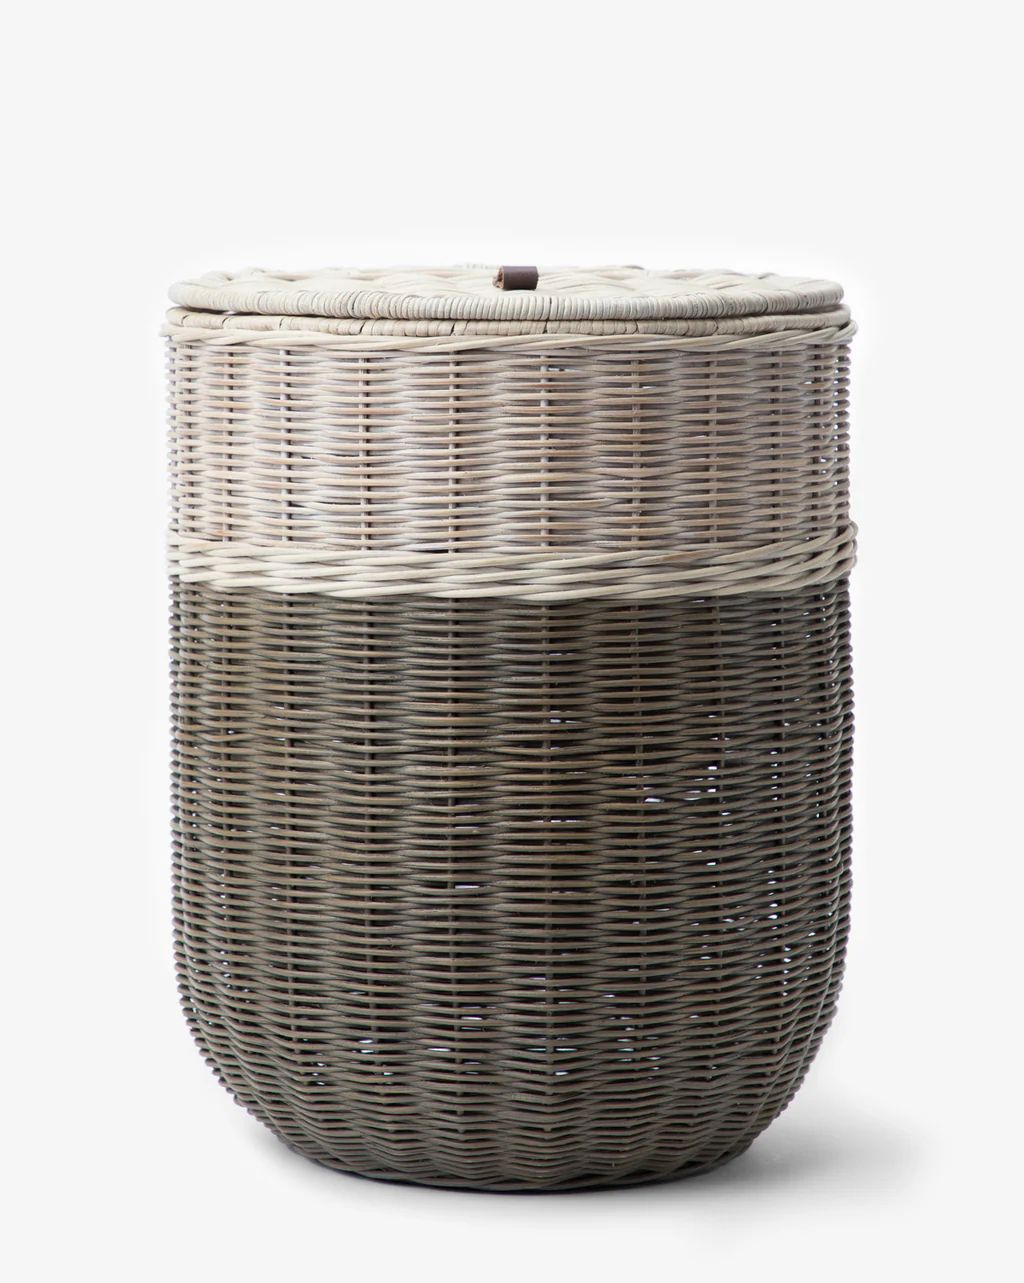 Cannon Basket | McGee & Co.